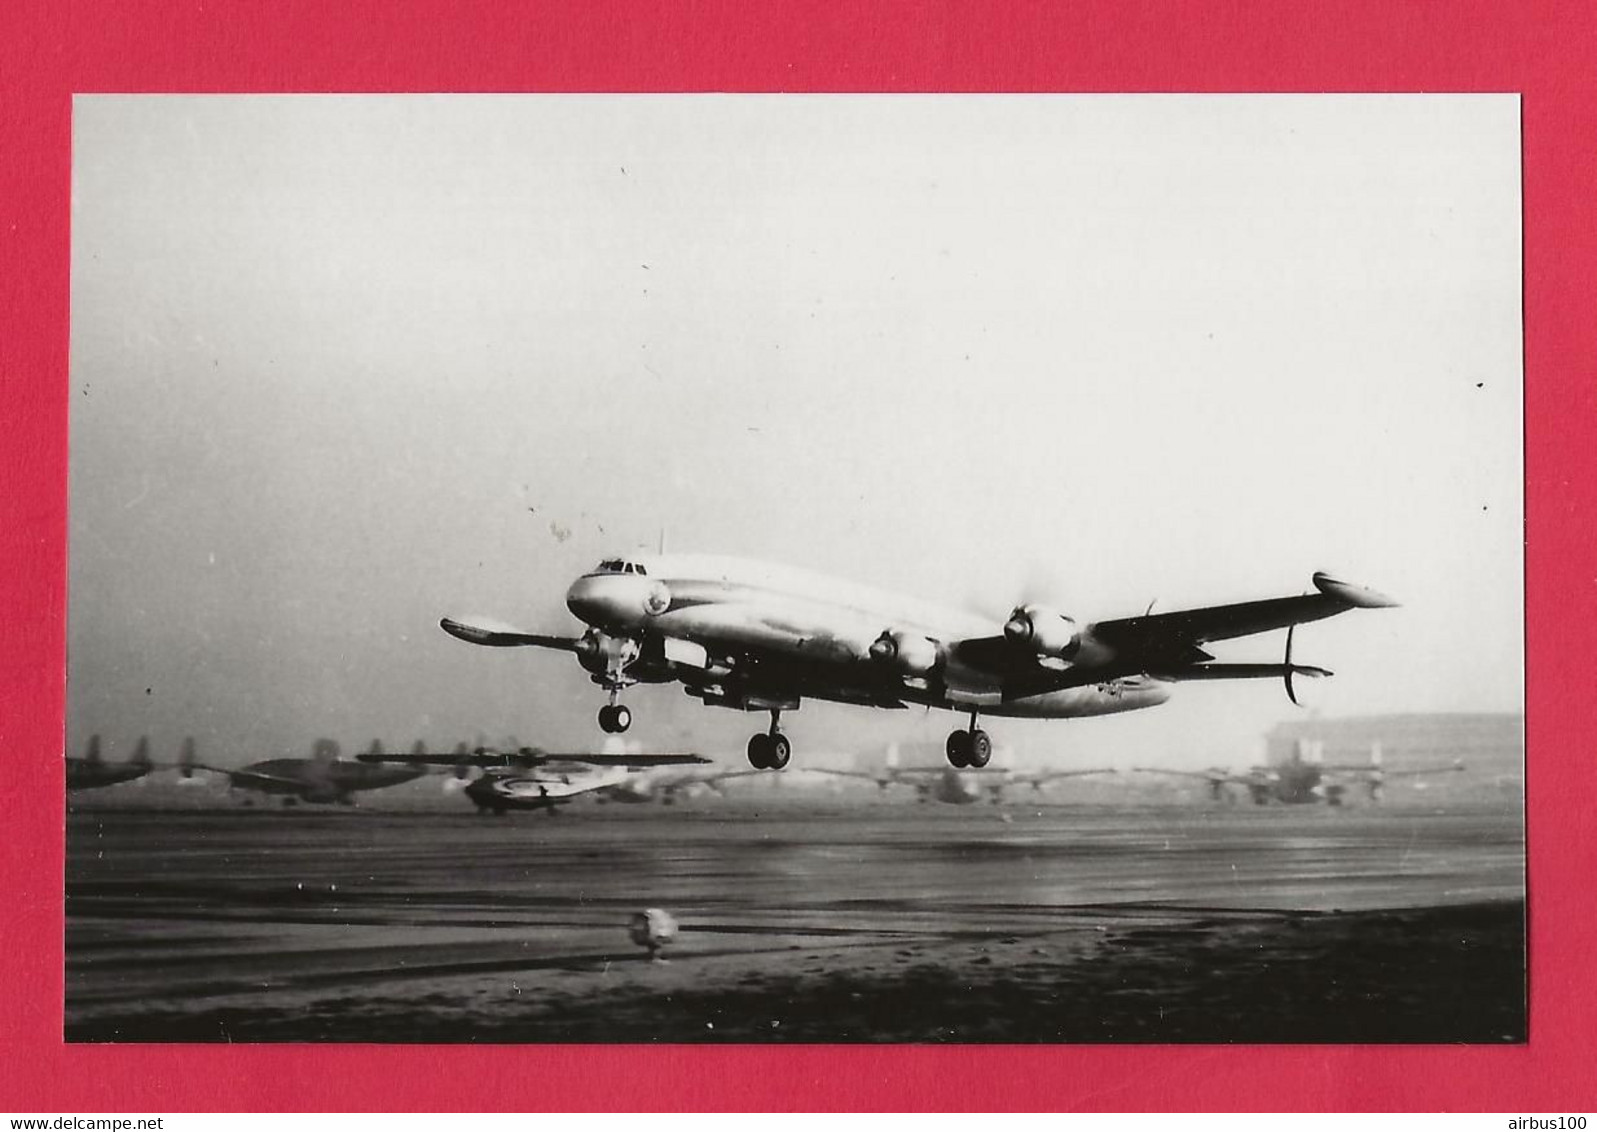 BELLE PHOTO REPRODUCTION AVION PLANE - COMPAGNIE LOCKHEED CONSTELLATION A L'ATTERRISSAGE - Aviation